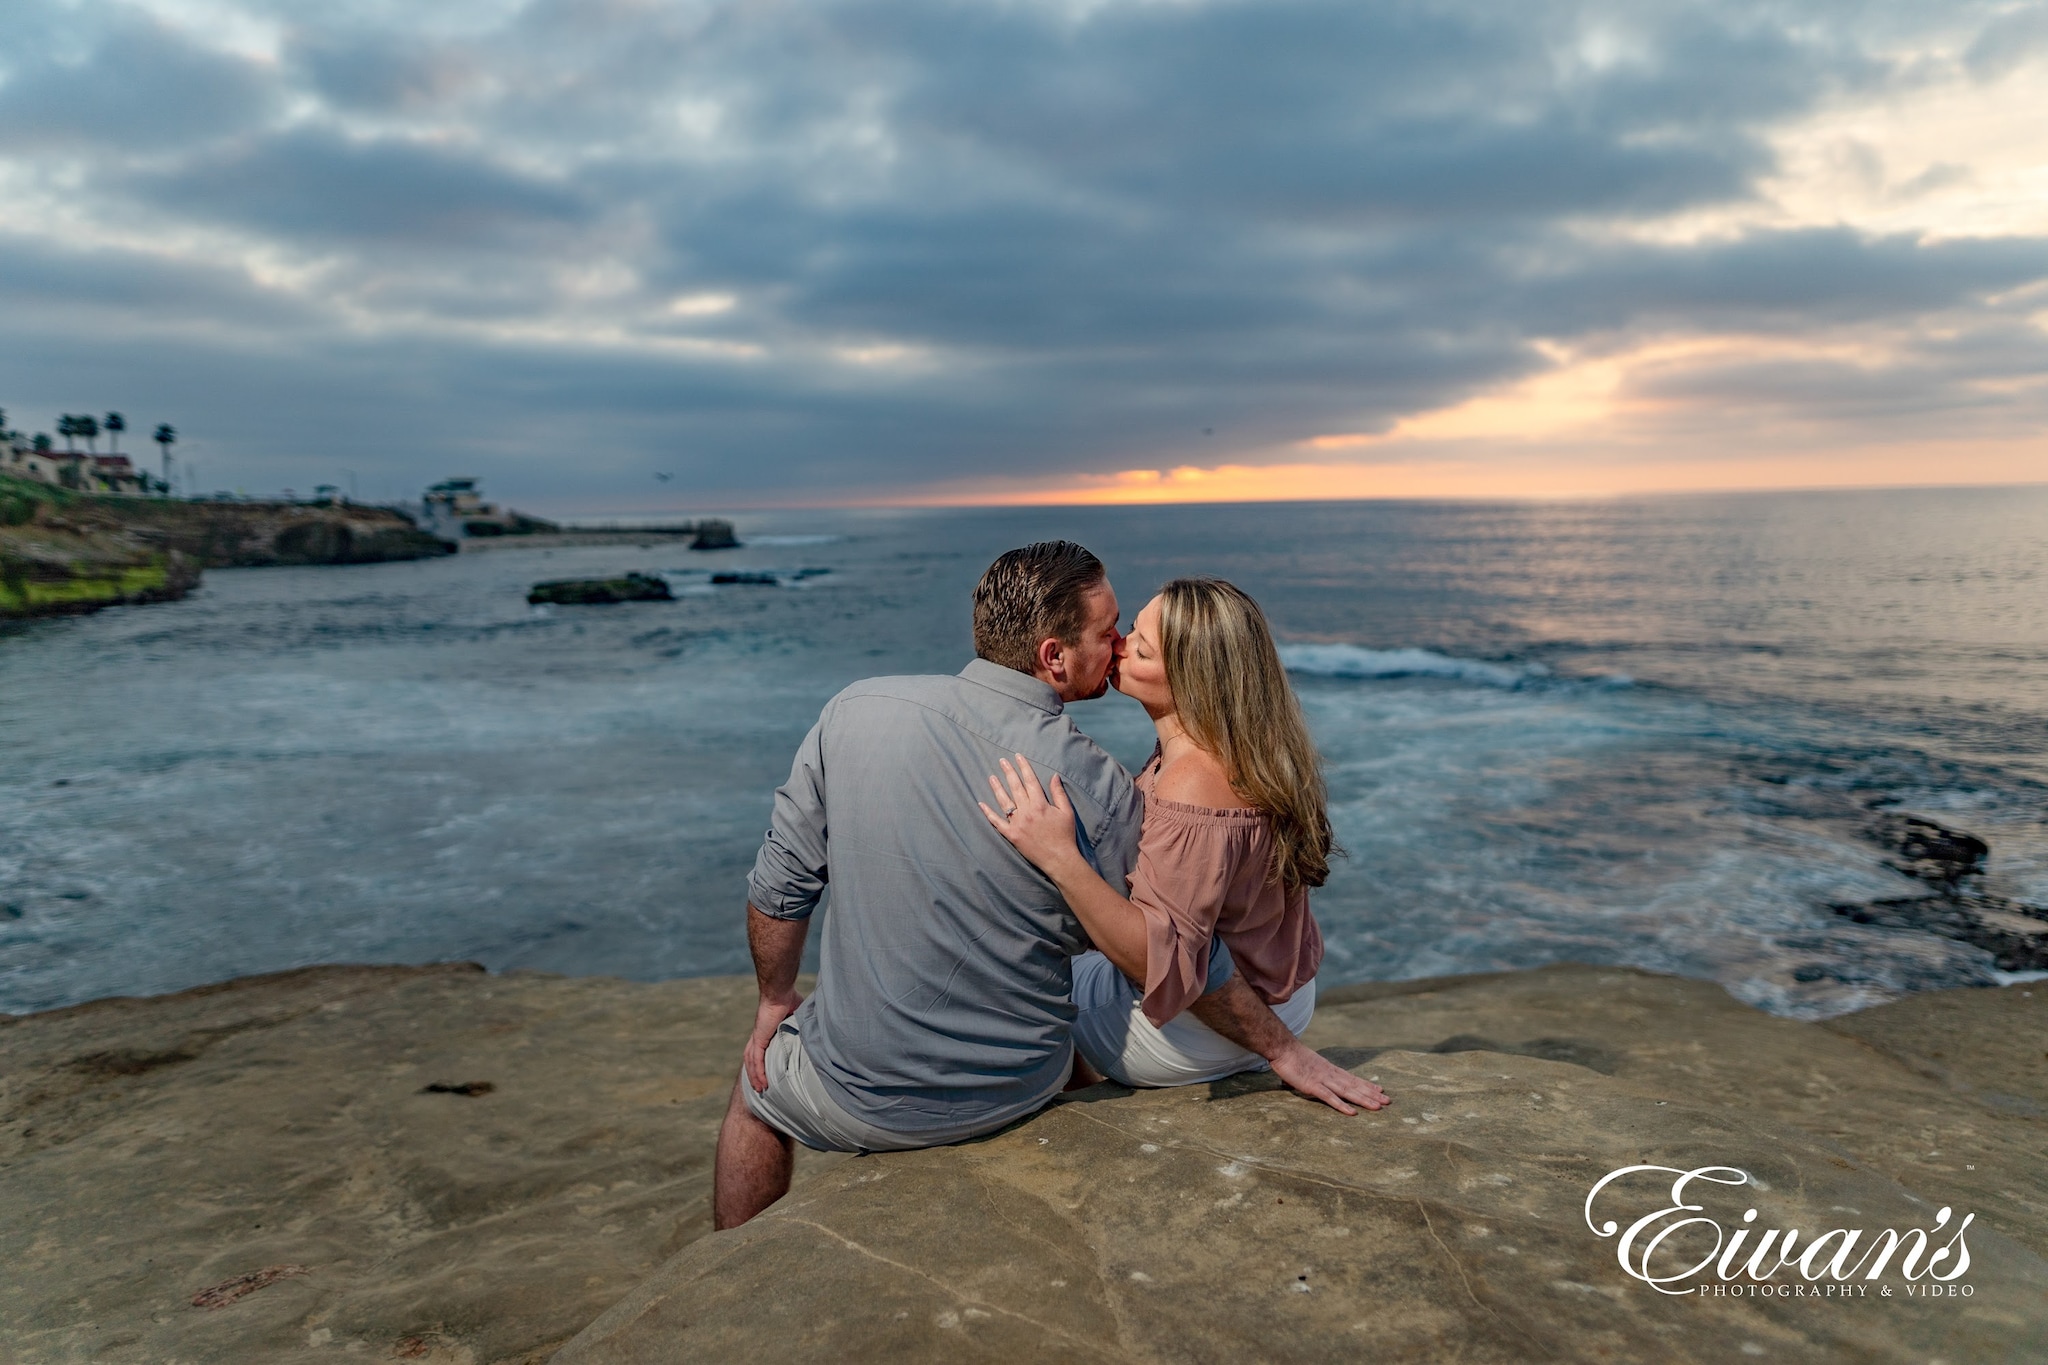 Engagement Photos At The Beach 002